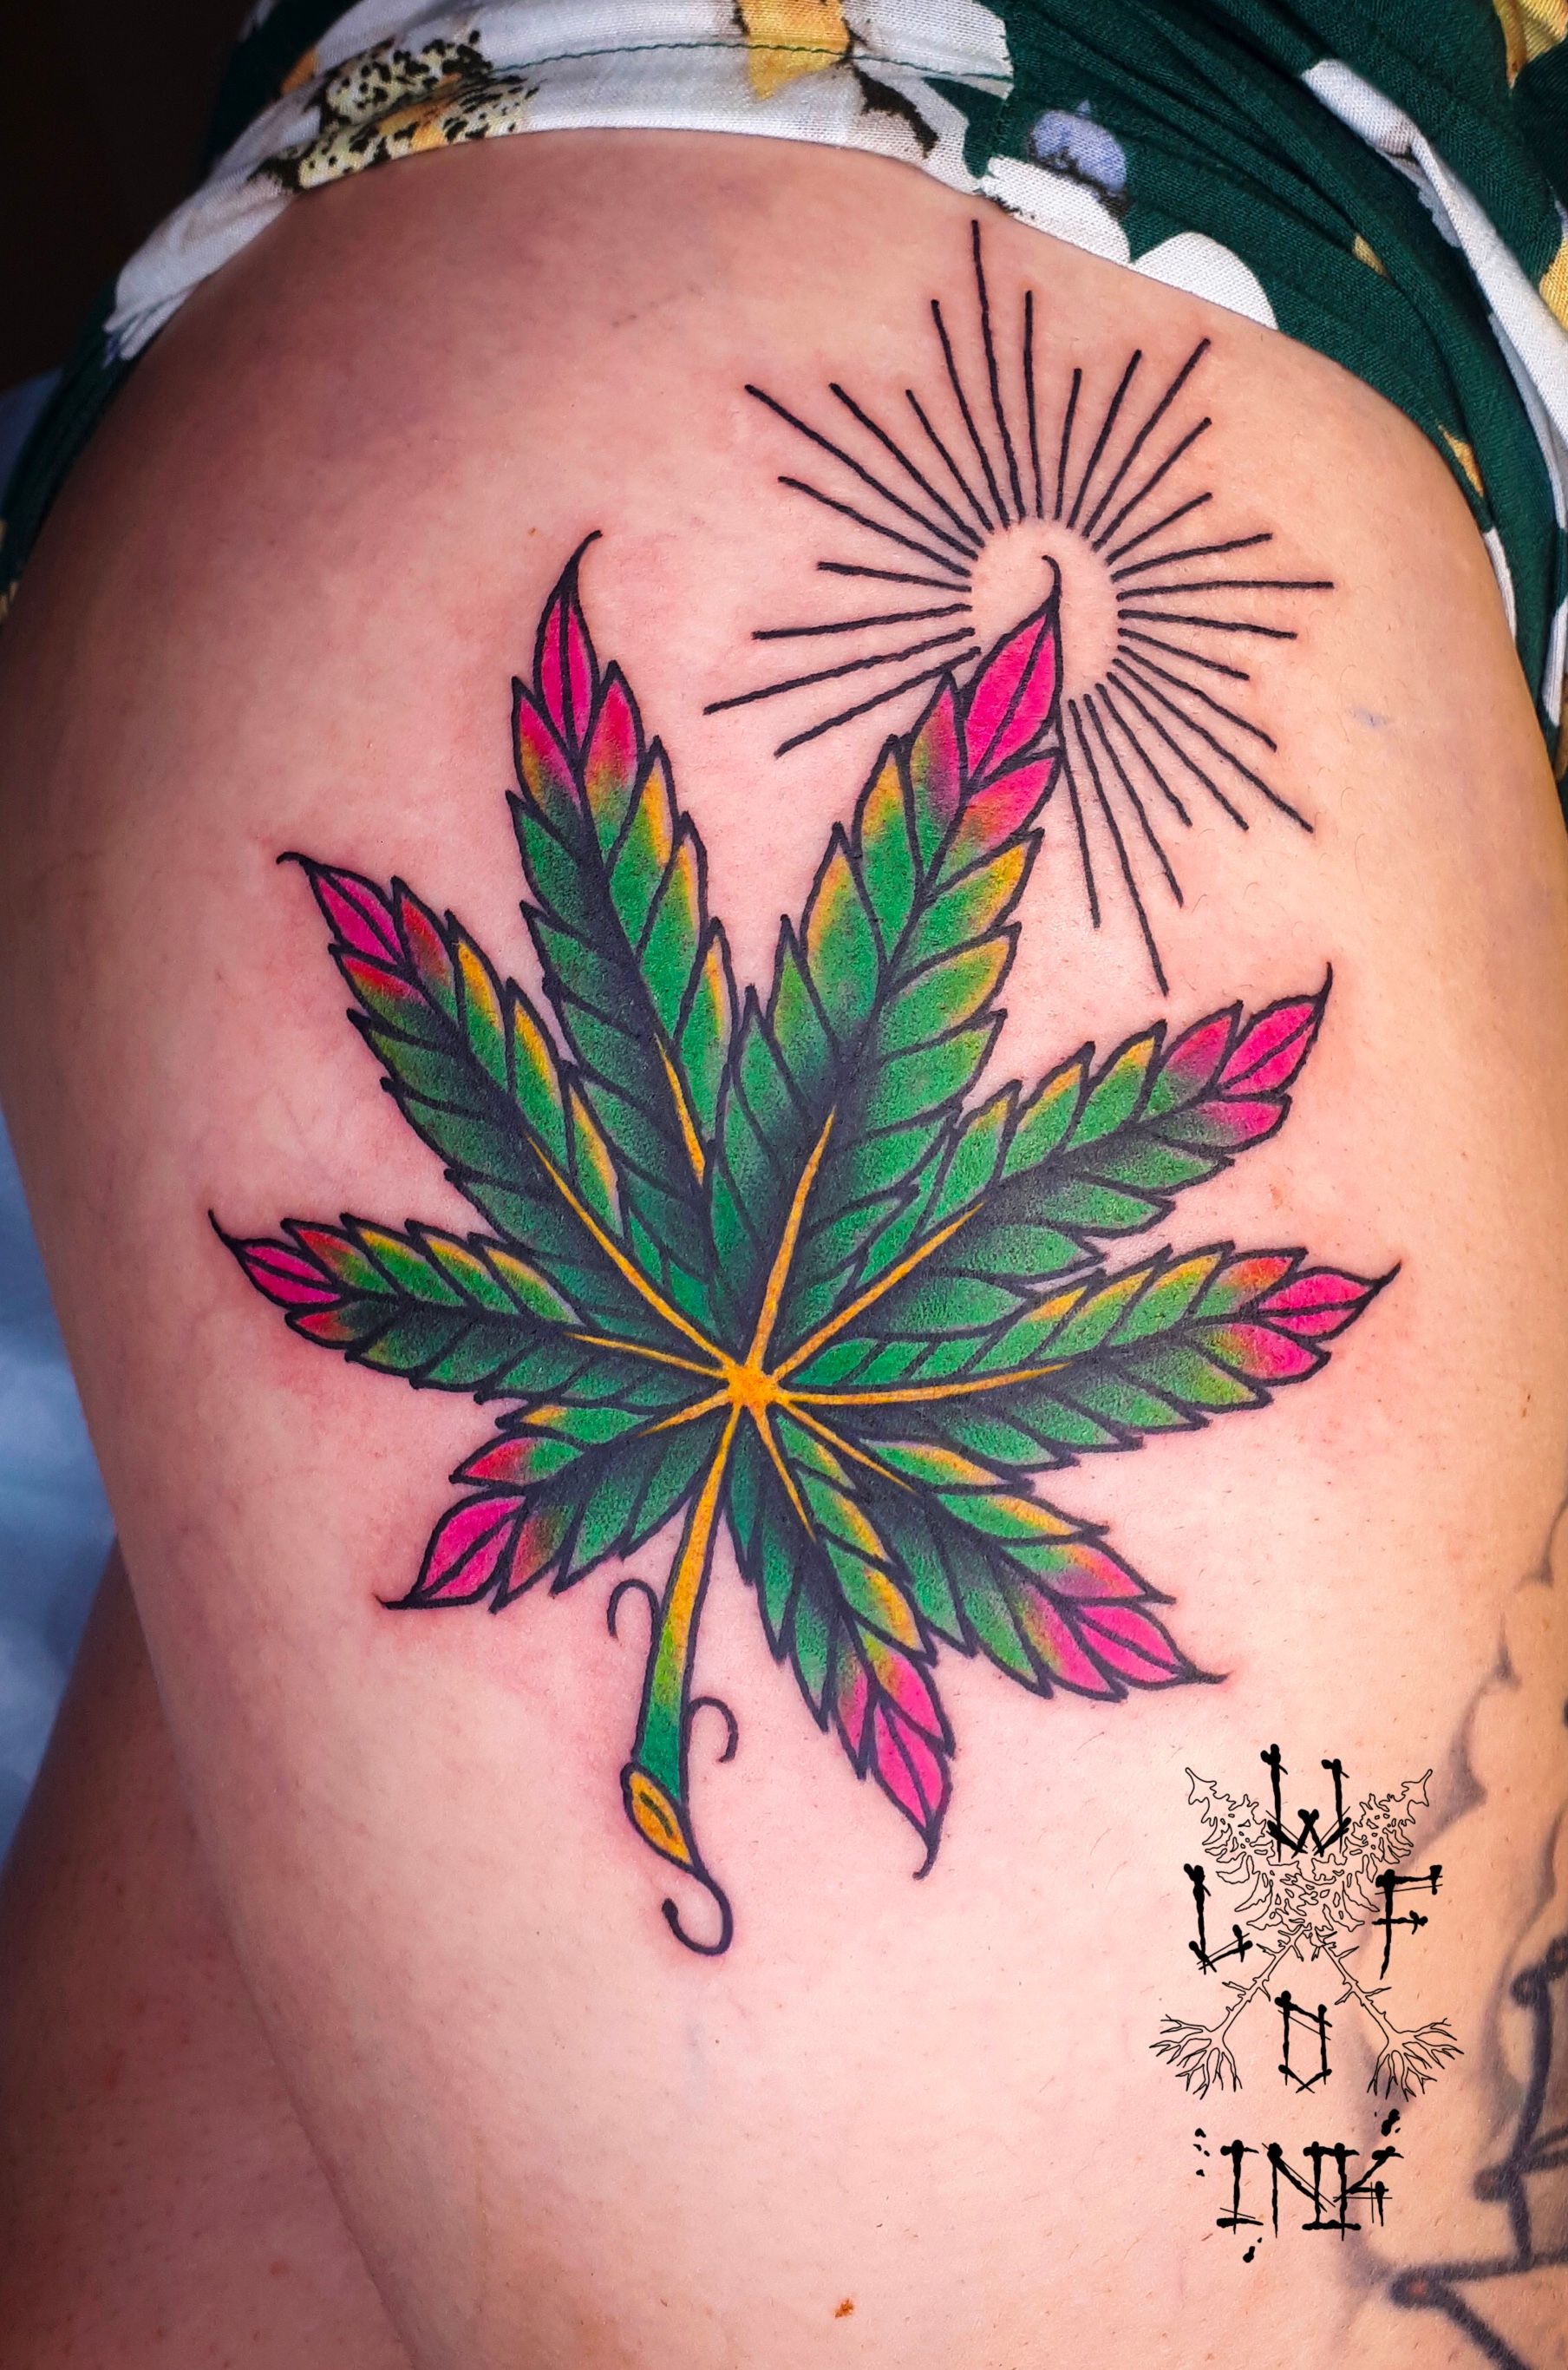 Tattoo uploaded by Luka Mikić • Chemical structure of THC #THC • Tattoodo